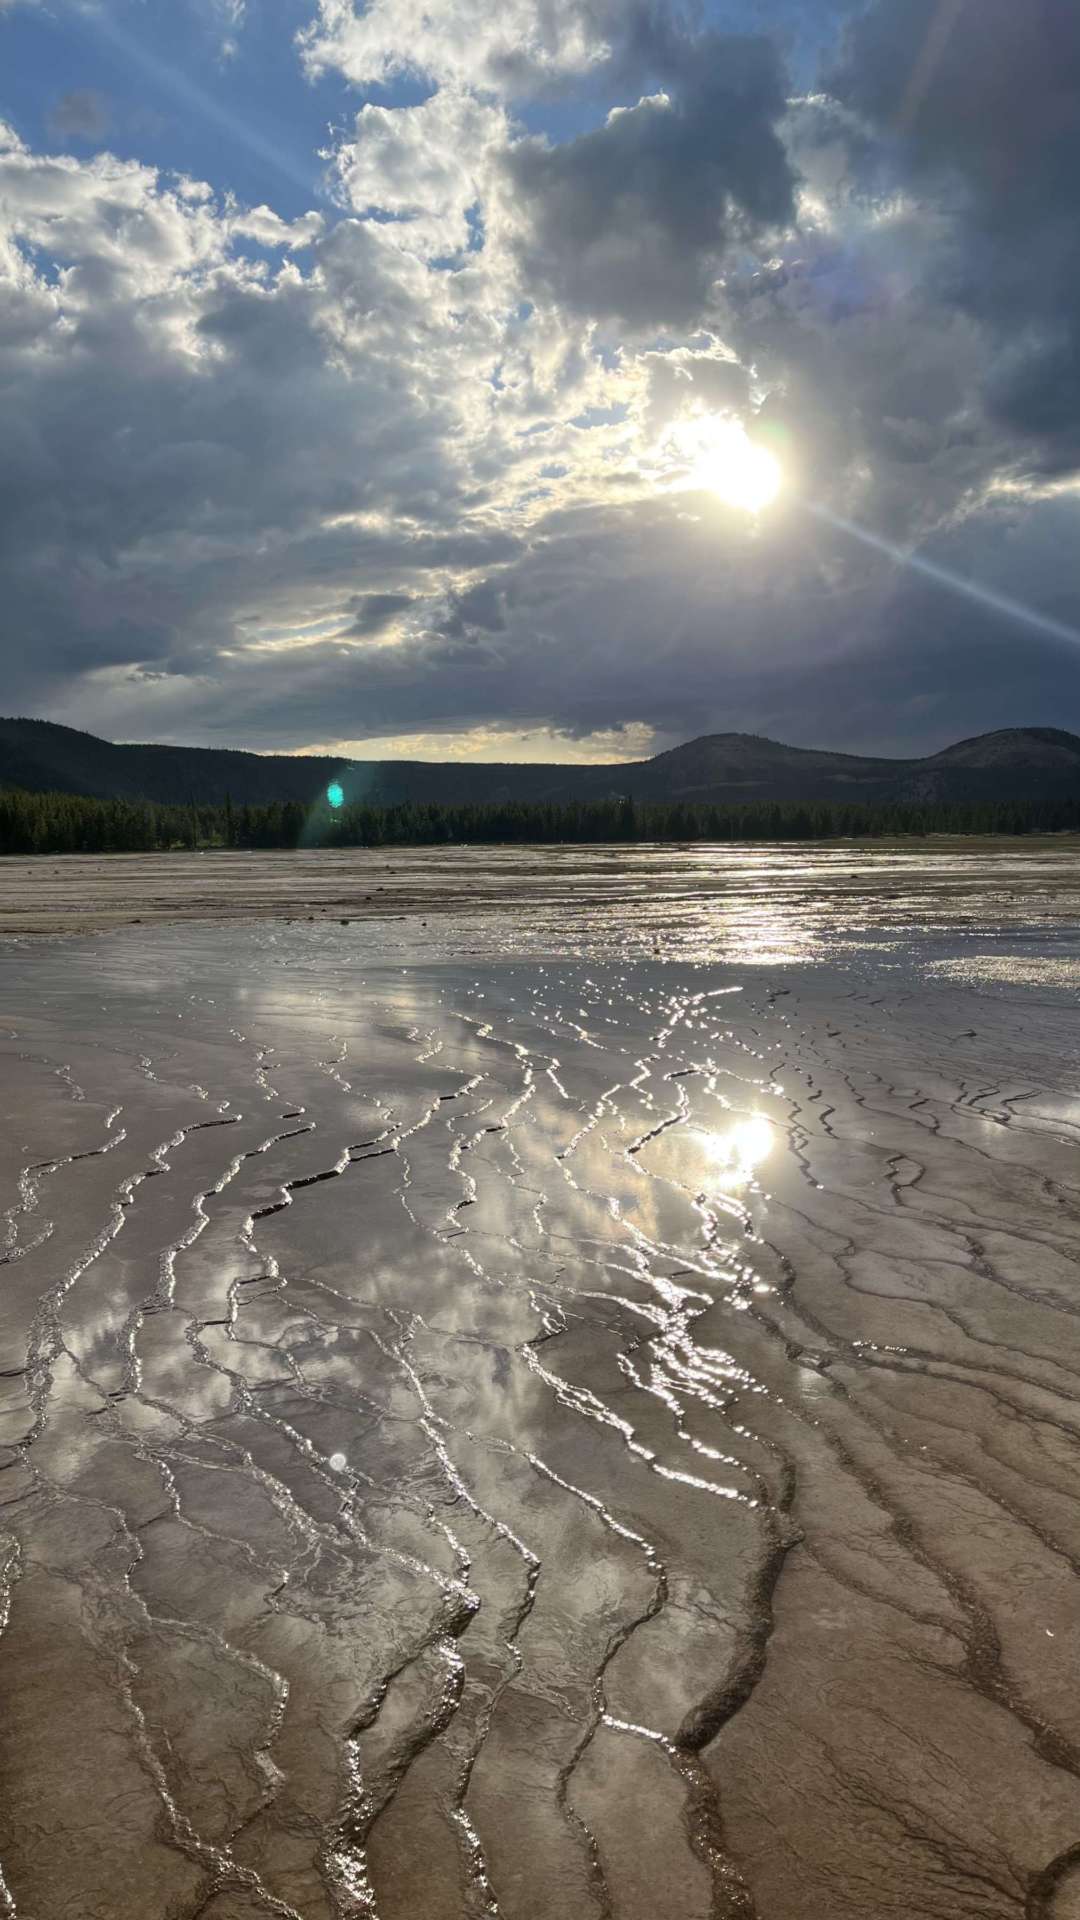 Photo of sun shining through clouds on water with mountains in the background at Yellowstone.